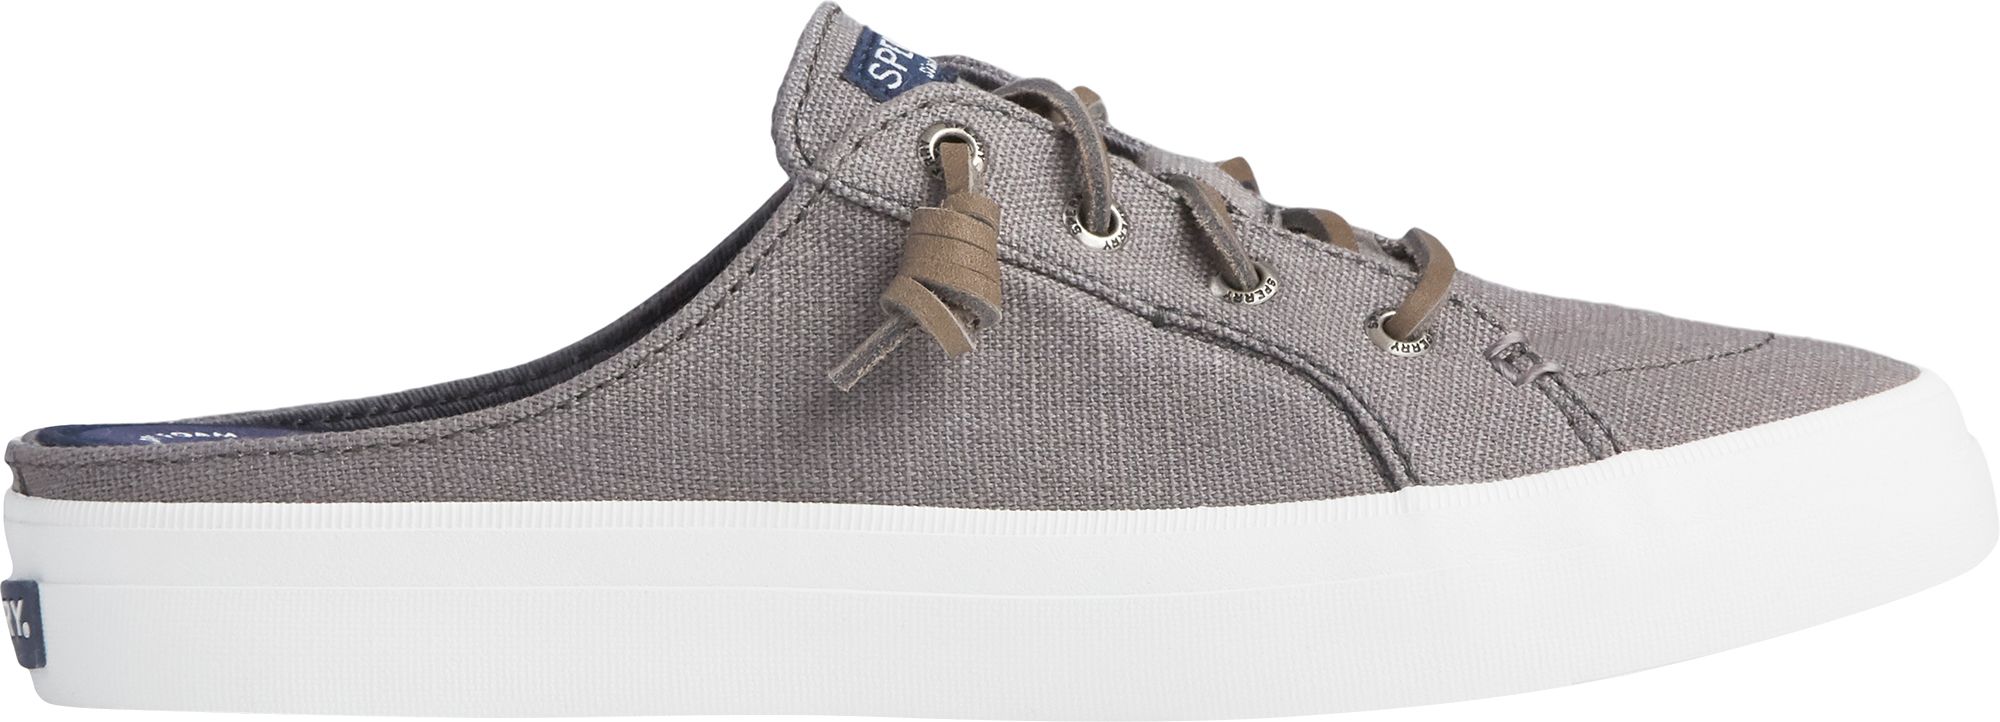 sperry casual shoes